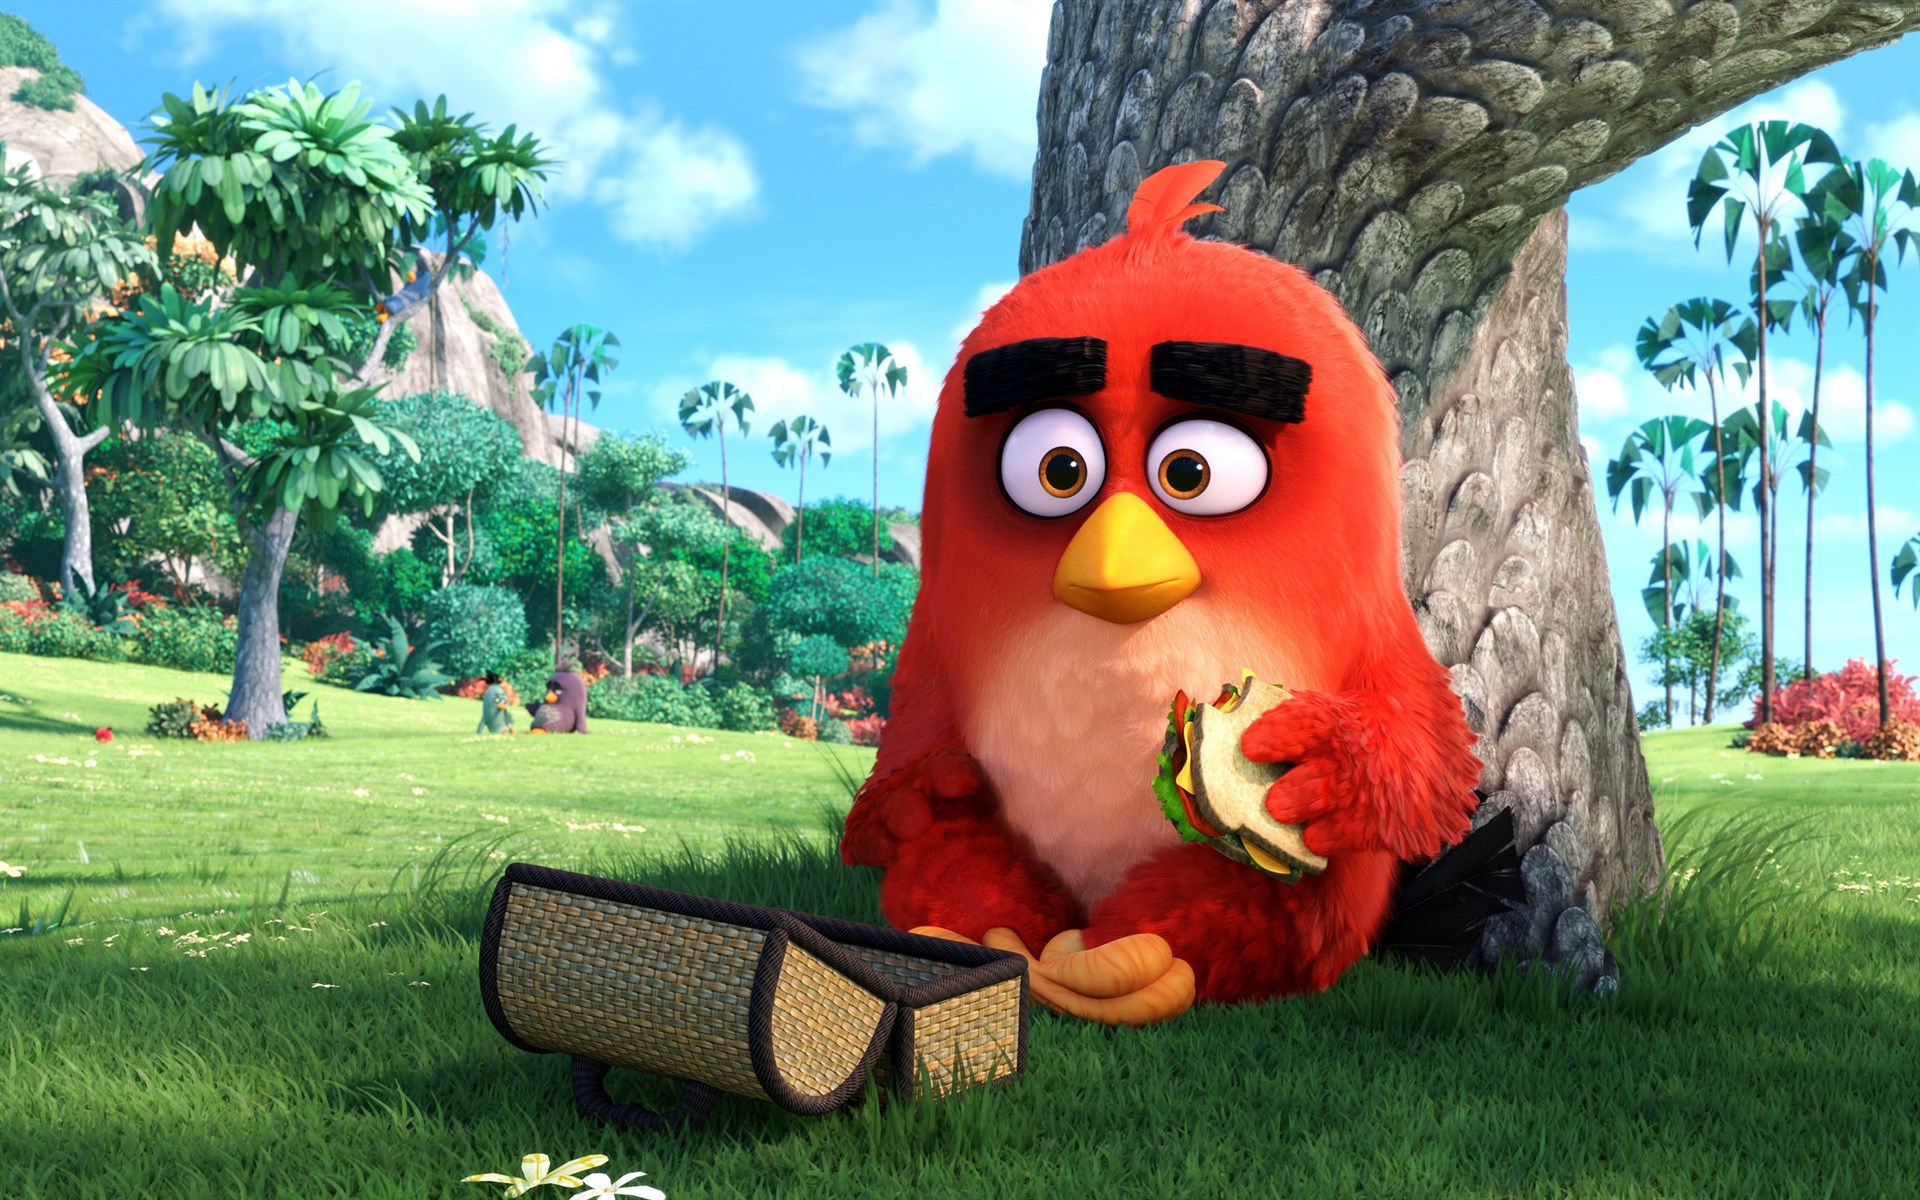 download wallpaper: Angry Birds – Red wallpaper